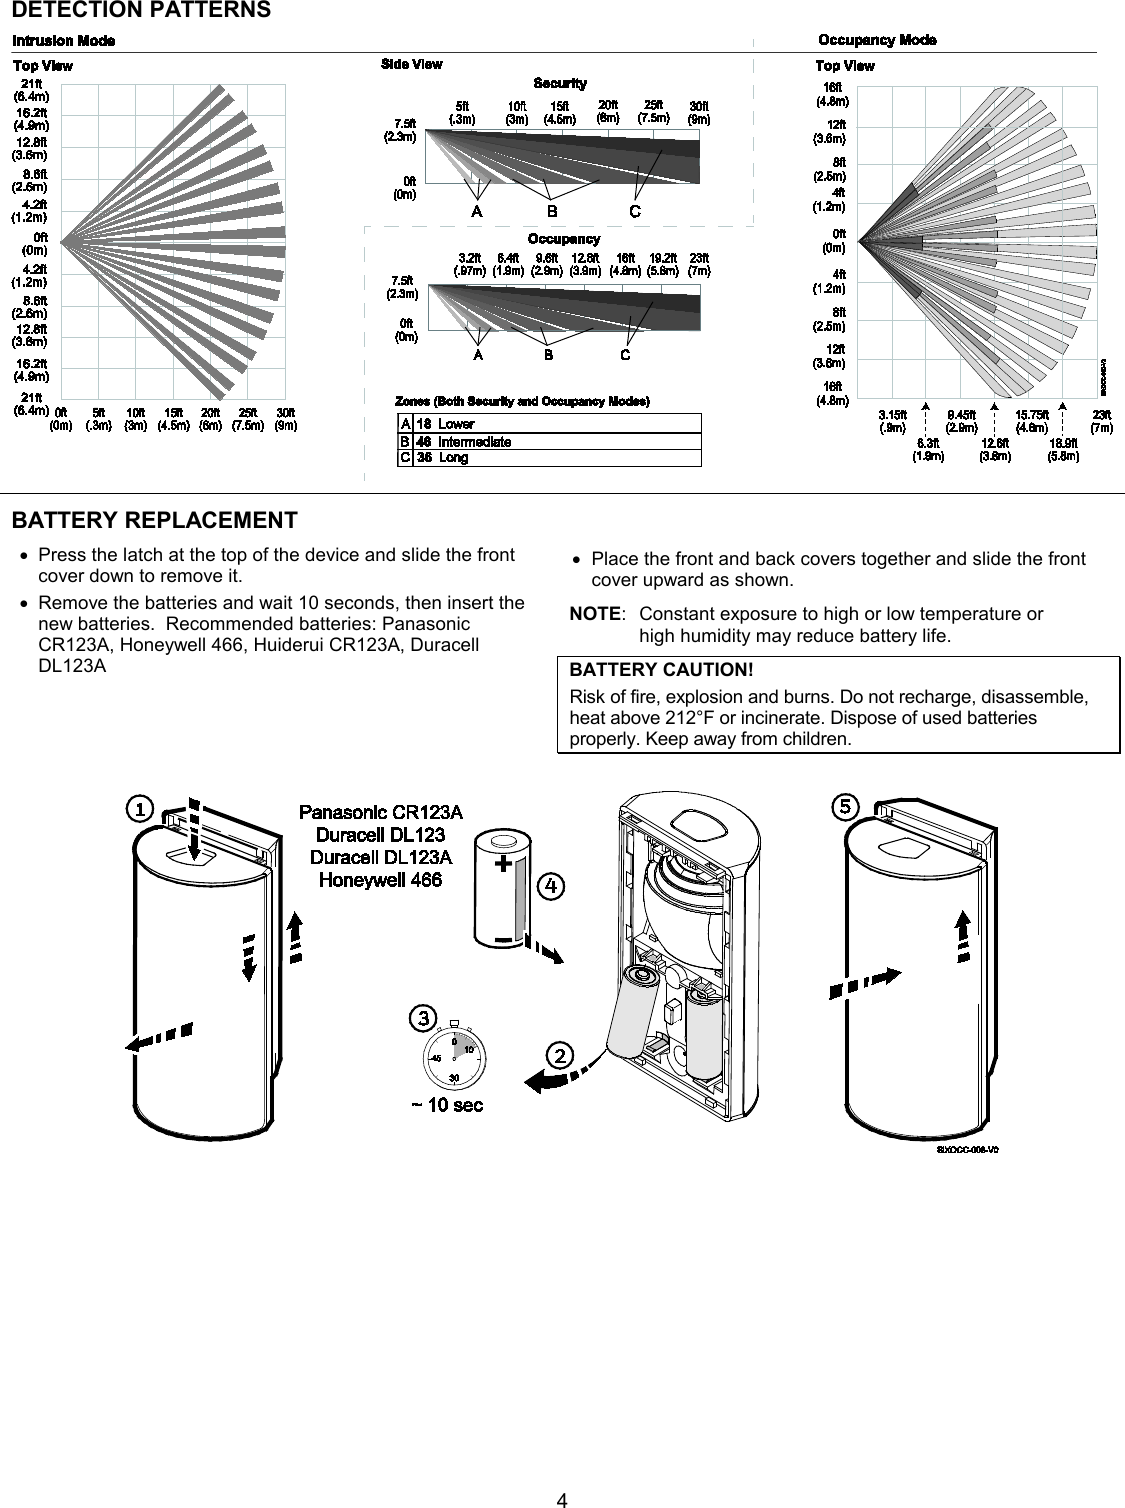  4 DETECTION PATTERNS  BATTERY REPLACEMENT   • Press the latch at the top of the device and slide the front cover down to remove it.  • Remove the batteries and wait 10 seconds, then insert the new batteries.  Recommended batteries: Panasonic CR123A, Honeywell 466, Huiderui CR123A, Duracell DL123A  • Place the front and back covers together and slide the front cover upward as shown. NOTE:  Constant exposure to high or low temperature or  high humidity may reduce battery life. BATTERY CAUTION! Risk of fire, explosion and burns. Do not recharge, disassemble, heat above 212°F or incinerate. Dispose of used batteries properly. Keep away from children.   